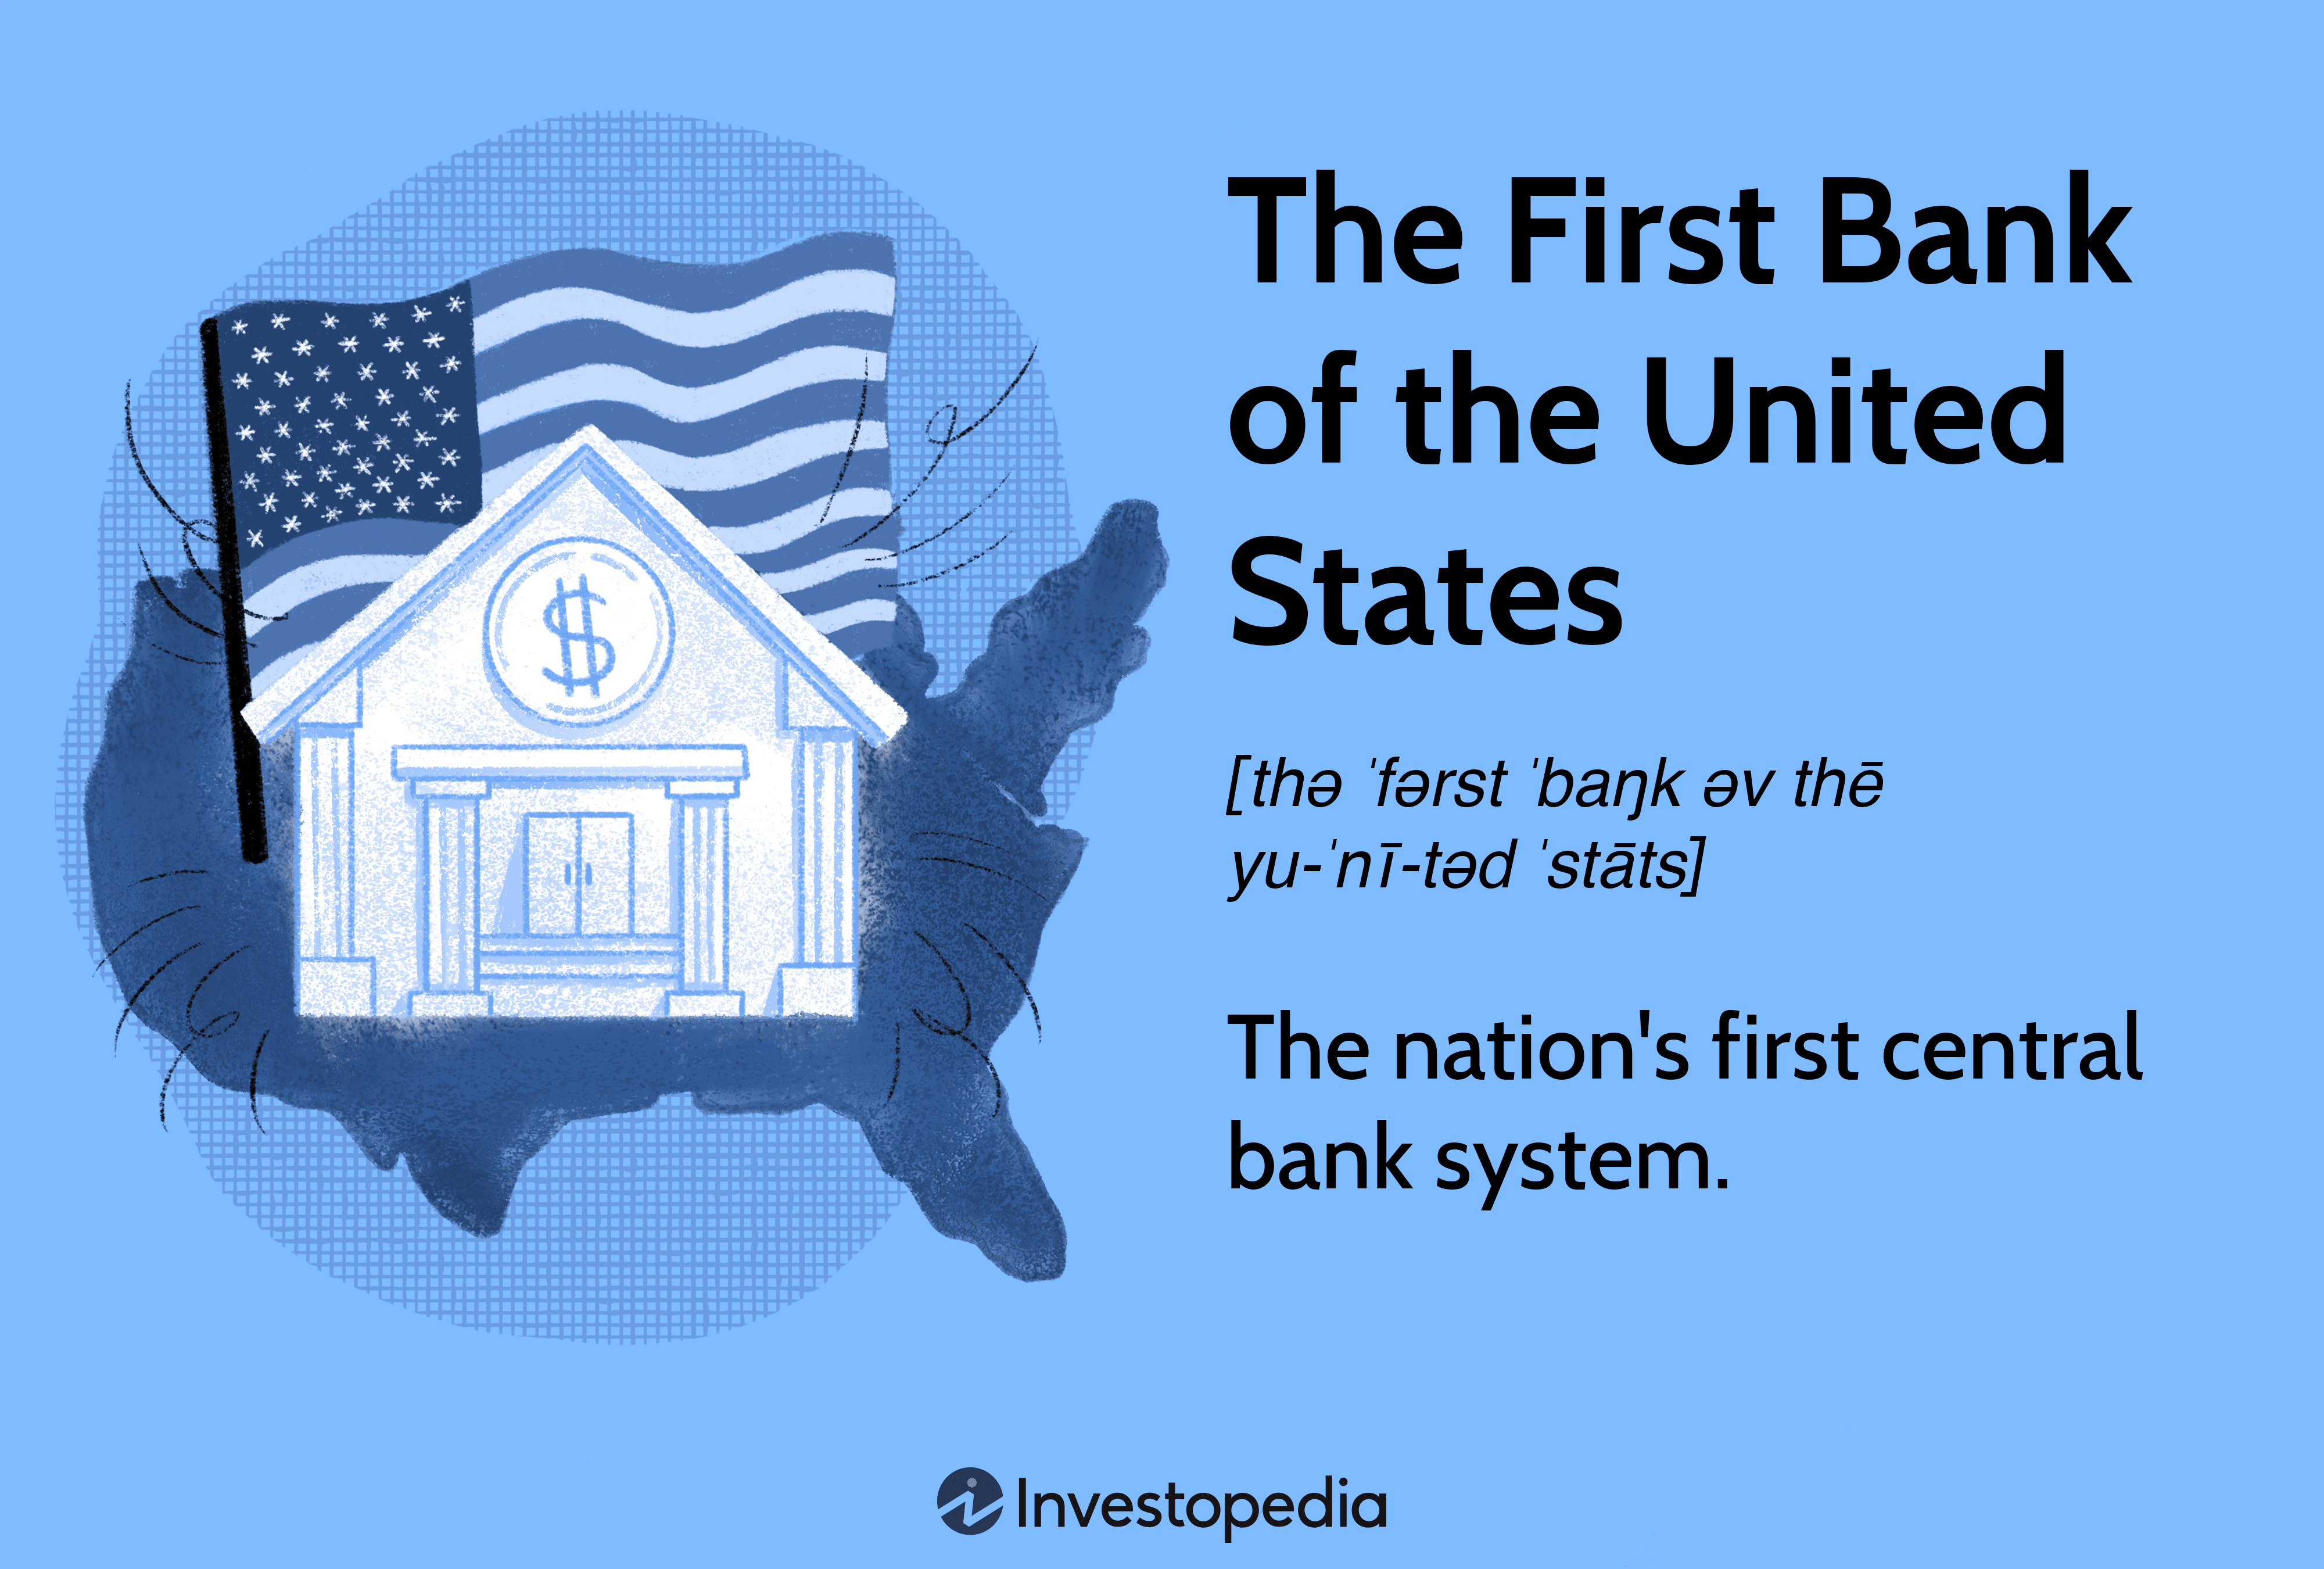 The First Bank of the United States